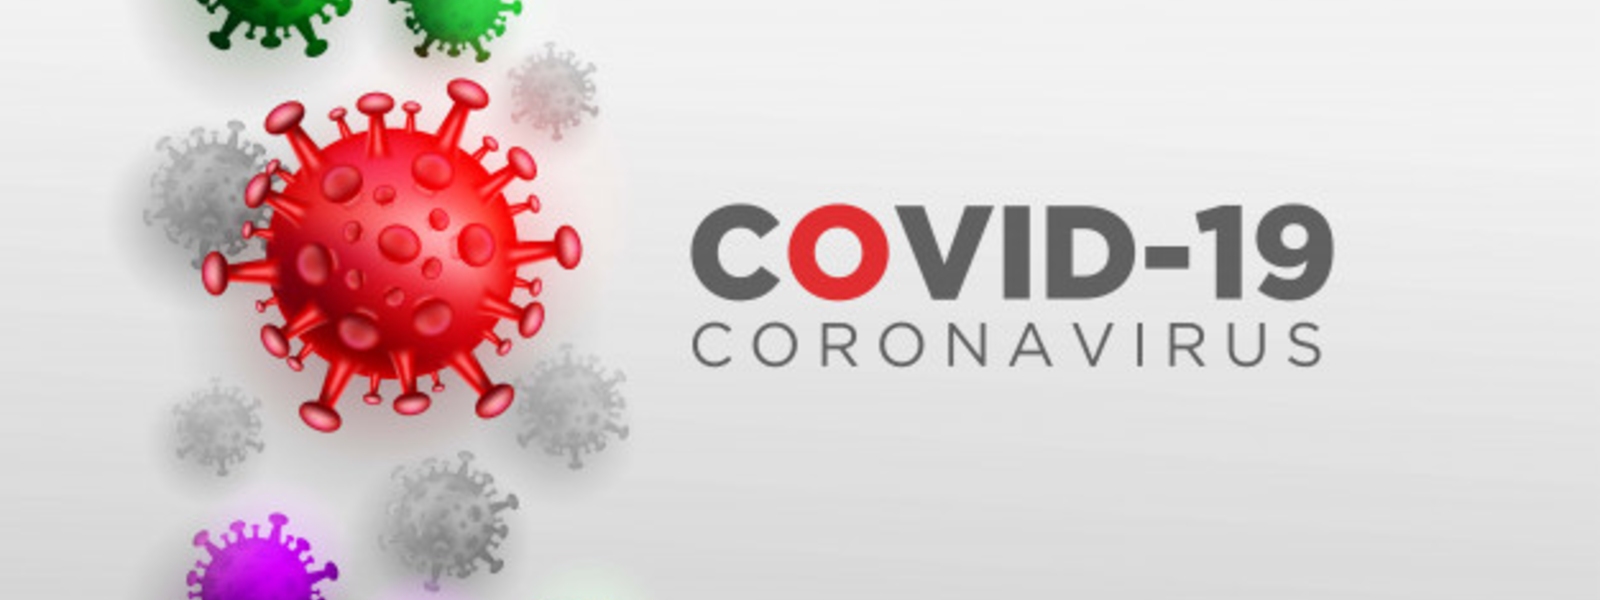 Woman who died in February reported as COVID Positive; 11 COVID fatalities on Thursday (06)